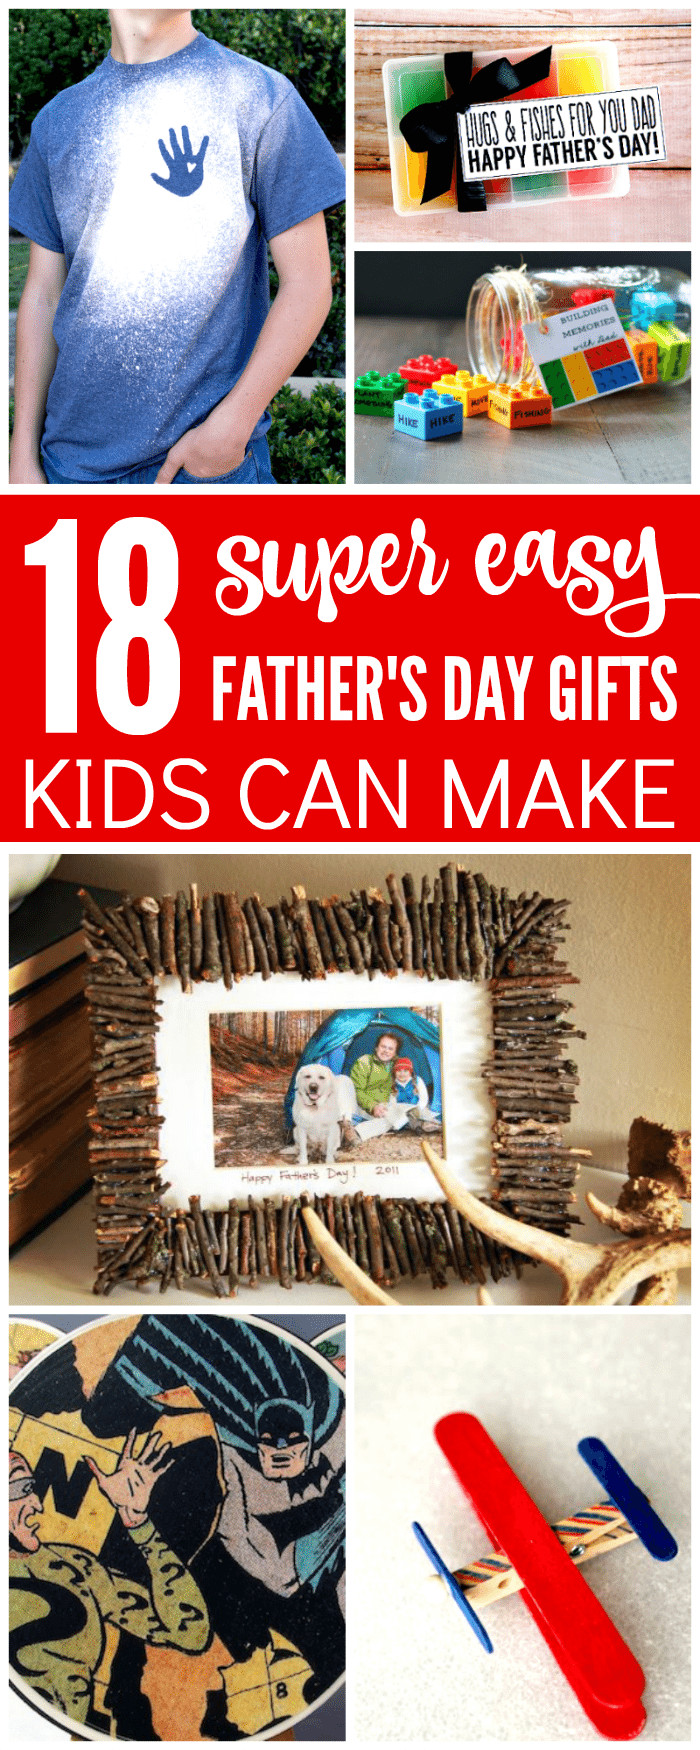 Gifts Kids Can Make For Dad
 18 Easy Father s Day Gifts Kids Can Make